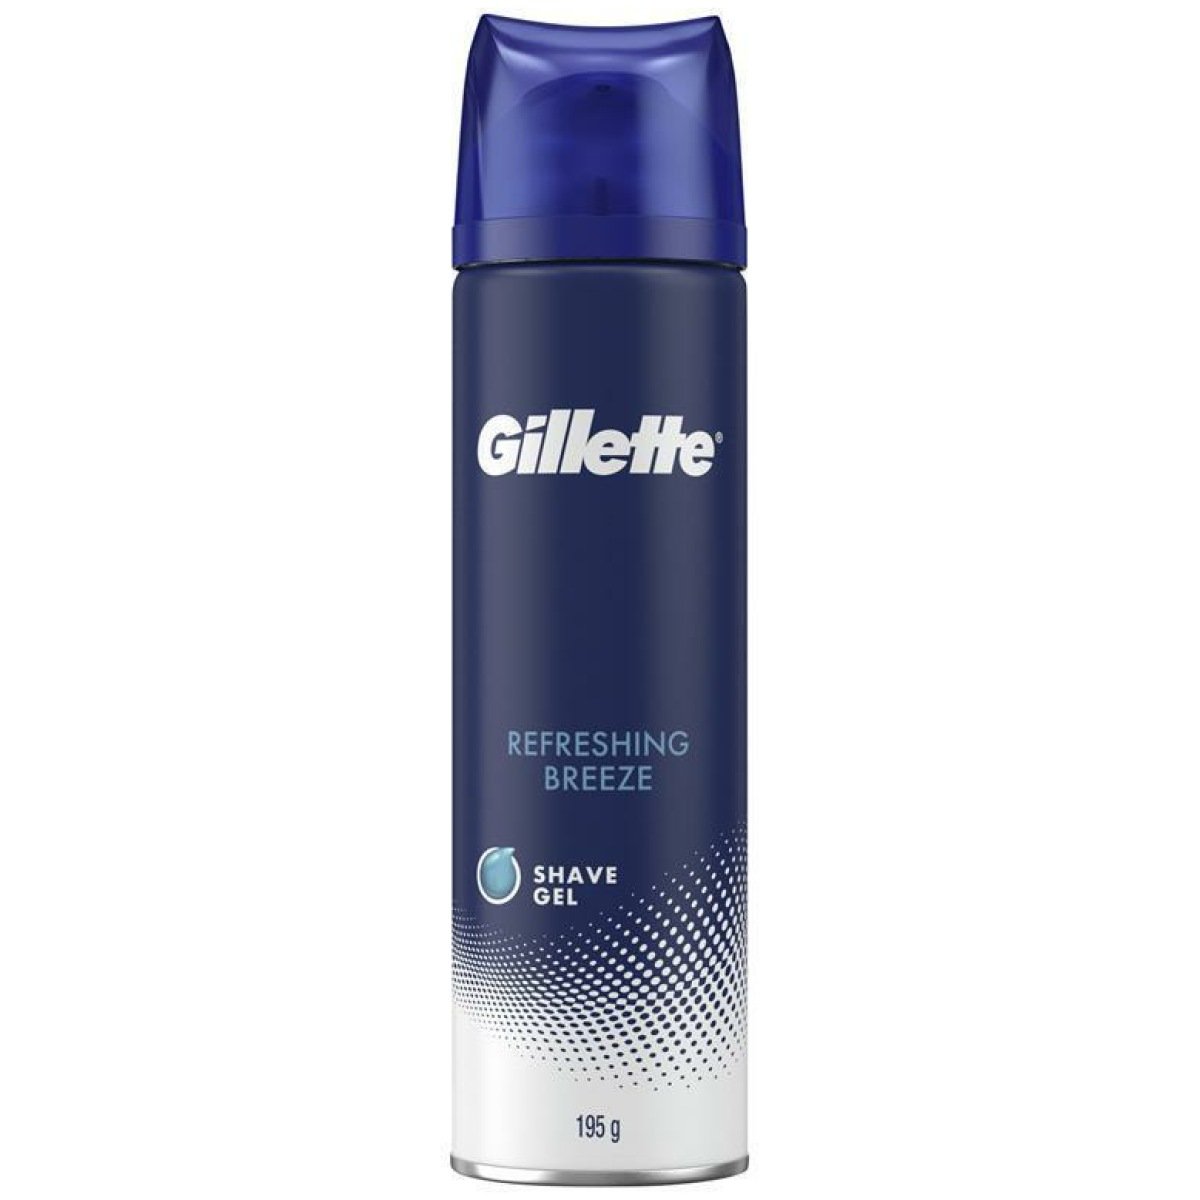 Gillette Shaving Gel Refreshing Breeze With Cocoa Butter 195g